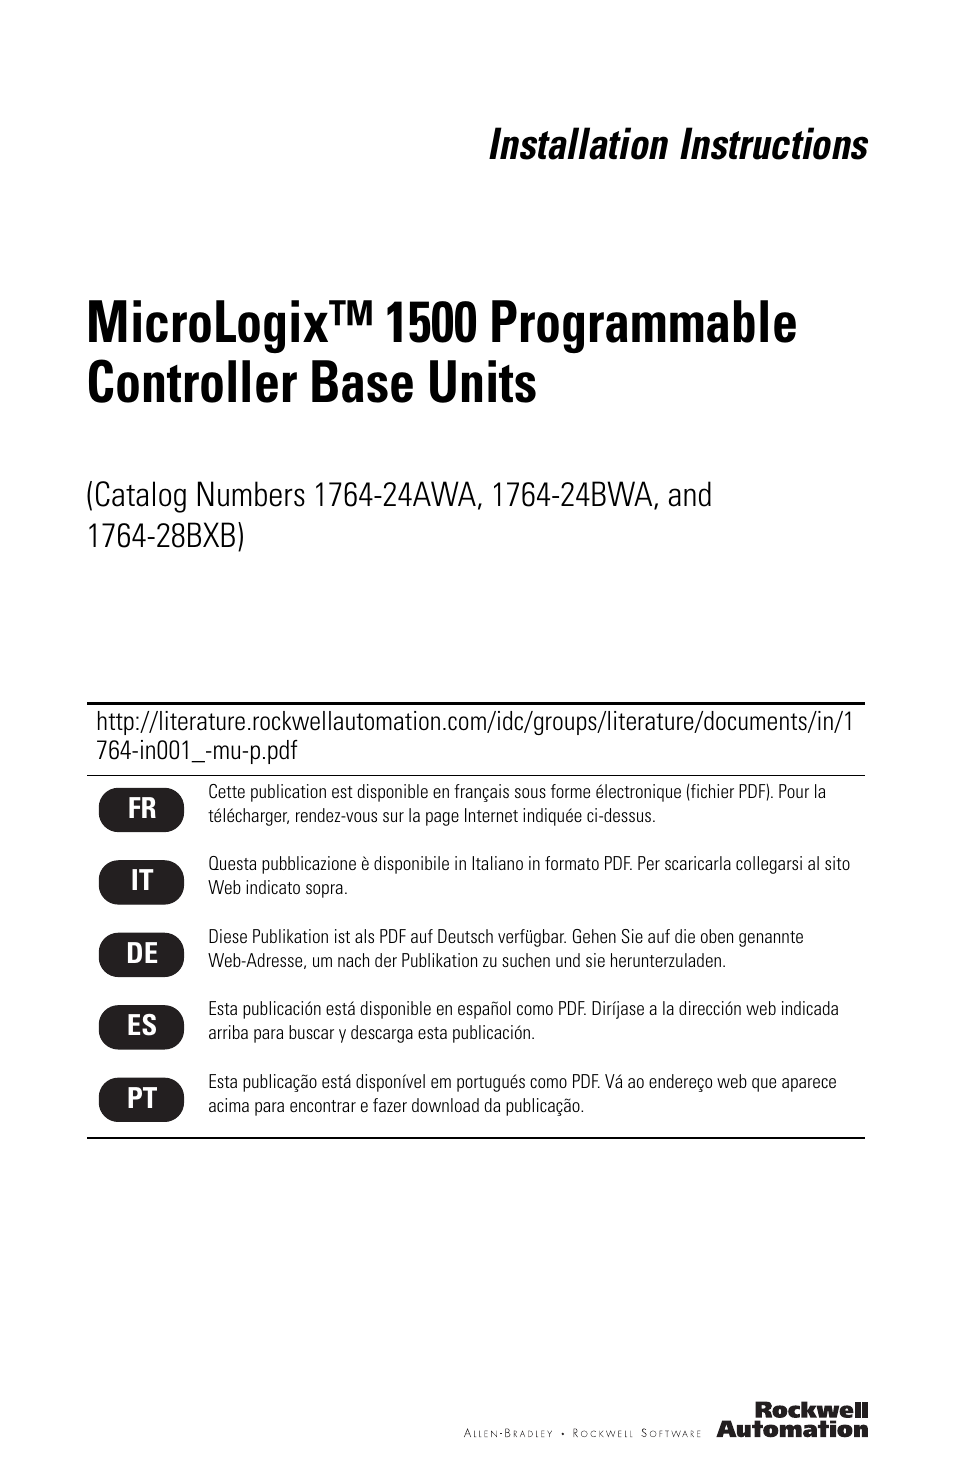 Rockwell Automation 1764-28BXB MicroLogix 1500 Programmable Controller Base Units User Manual | 27 pages